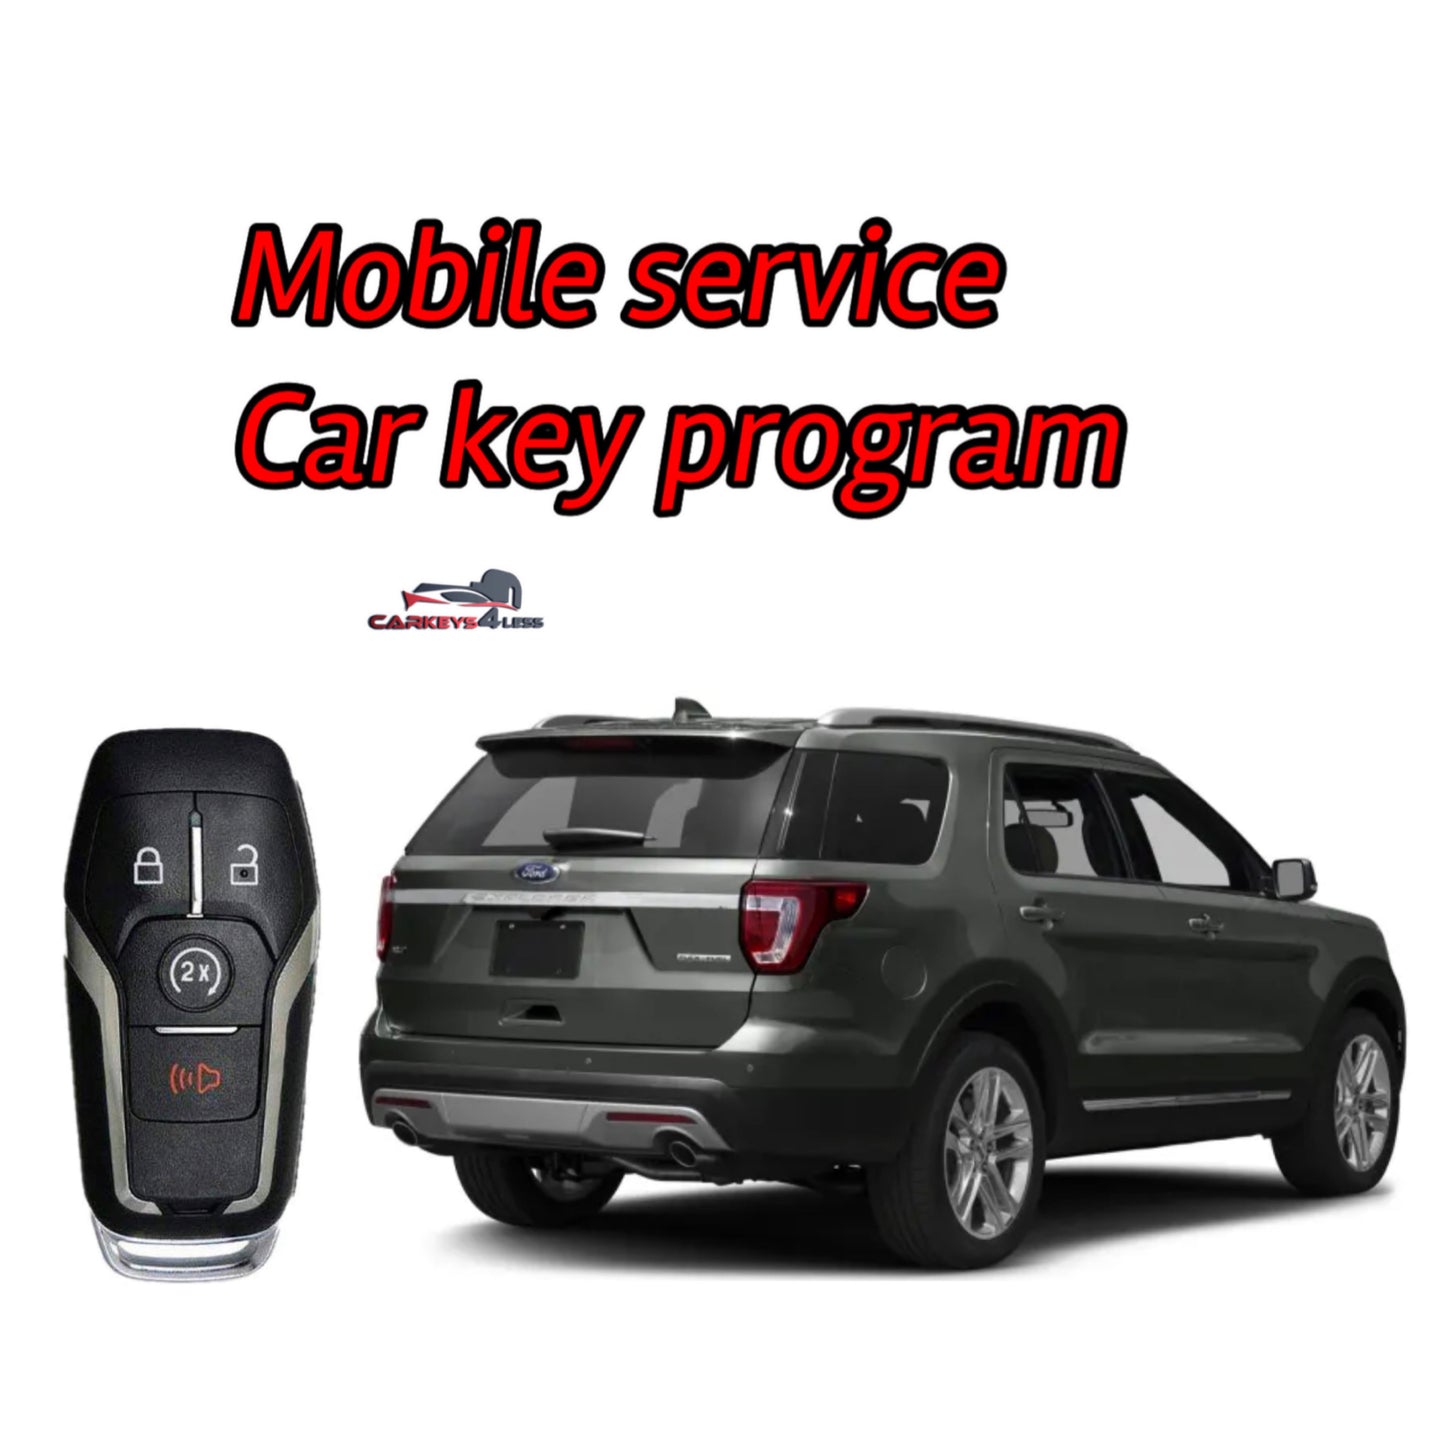 Mobile service for an aftermarket Lincoln smart key replacement